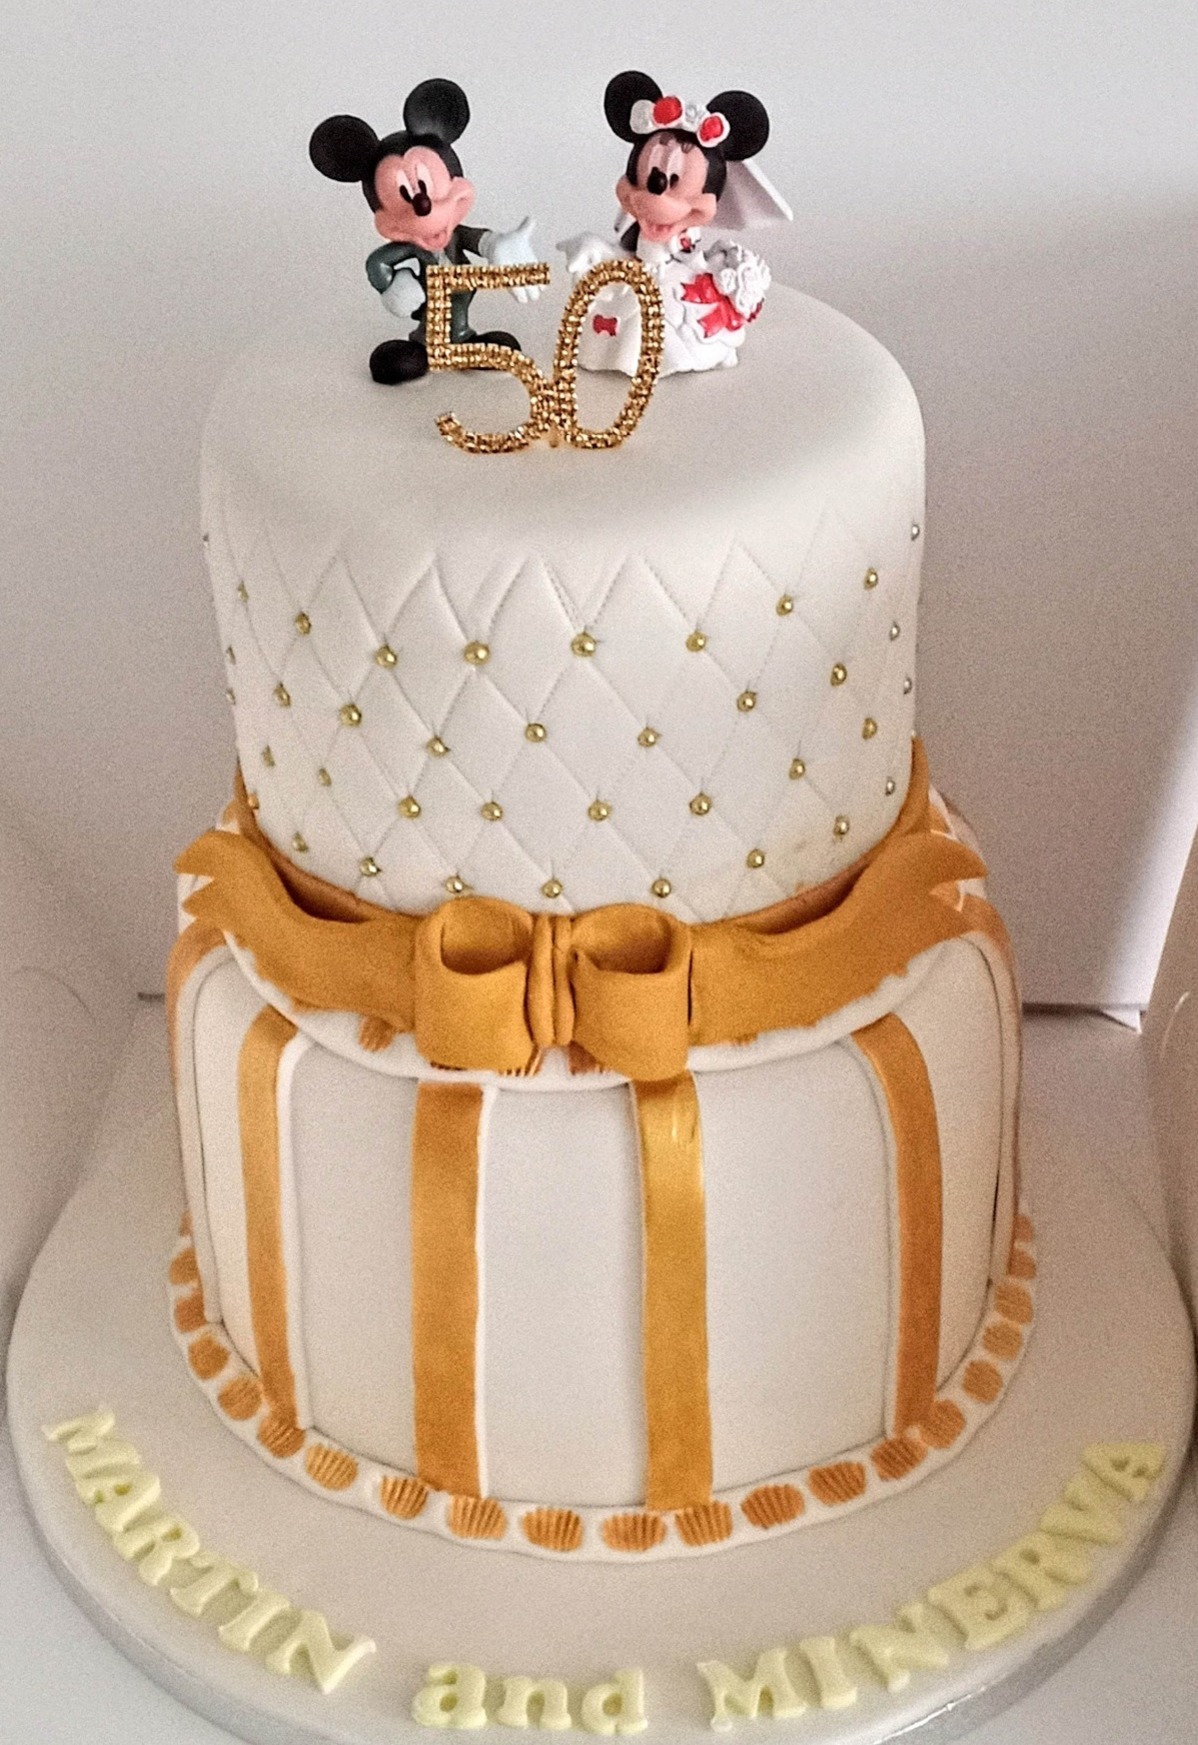 A 2 tier ivory and gold wedding cake with mickey bride and groom